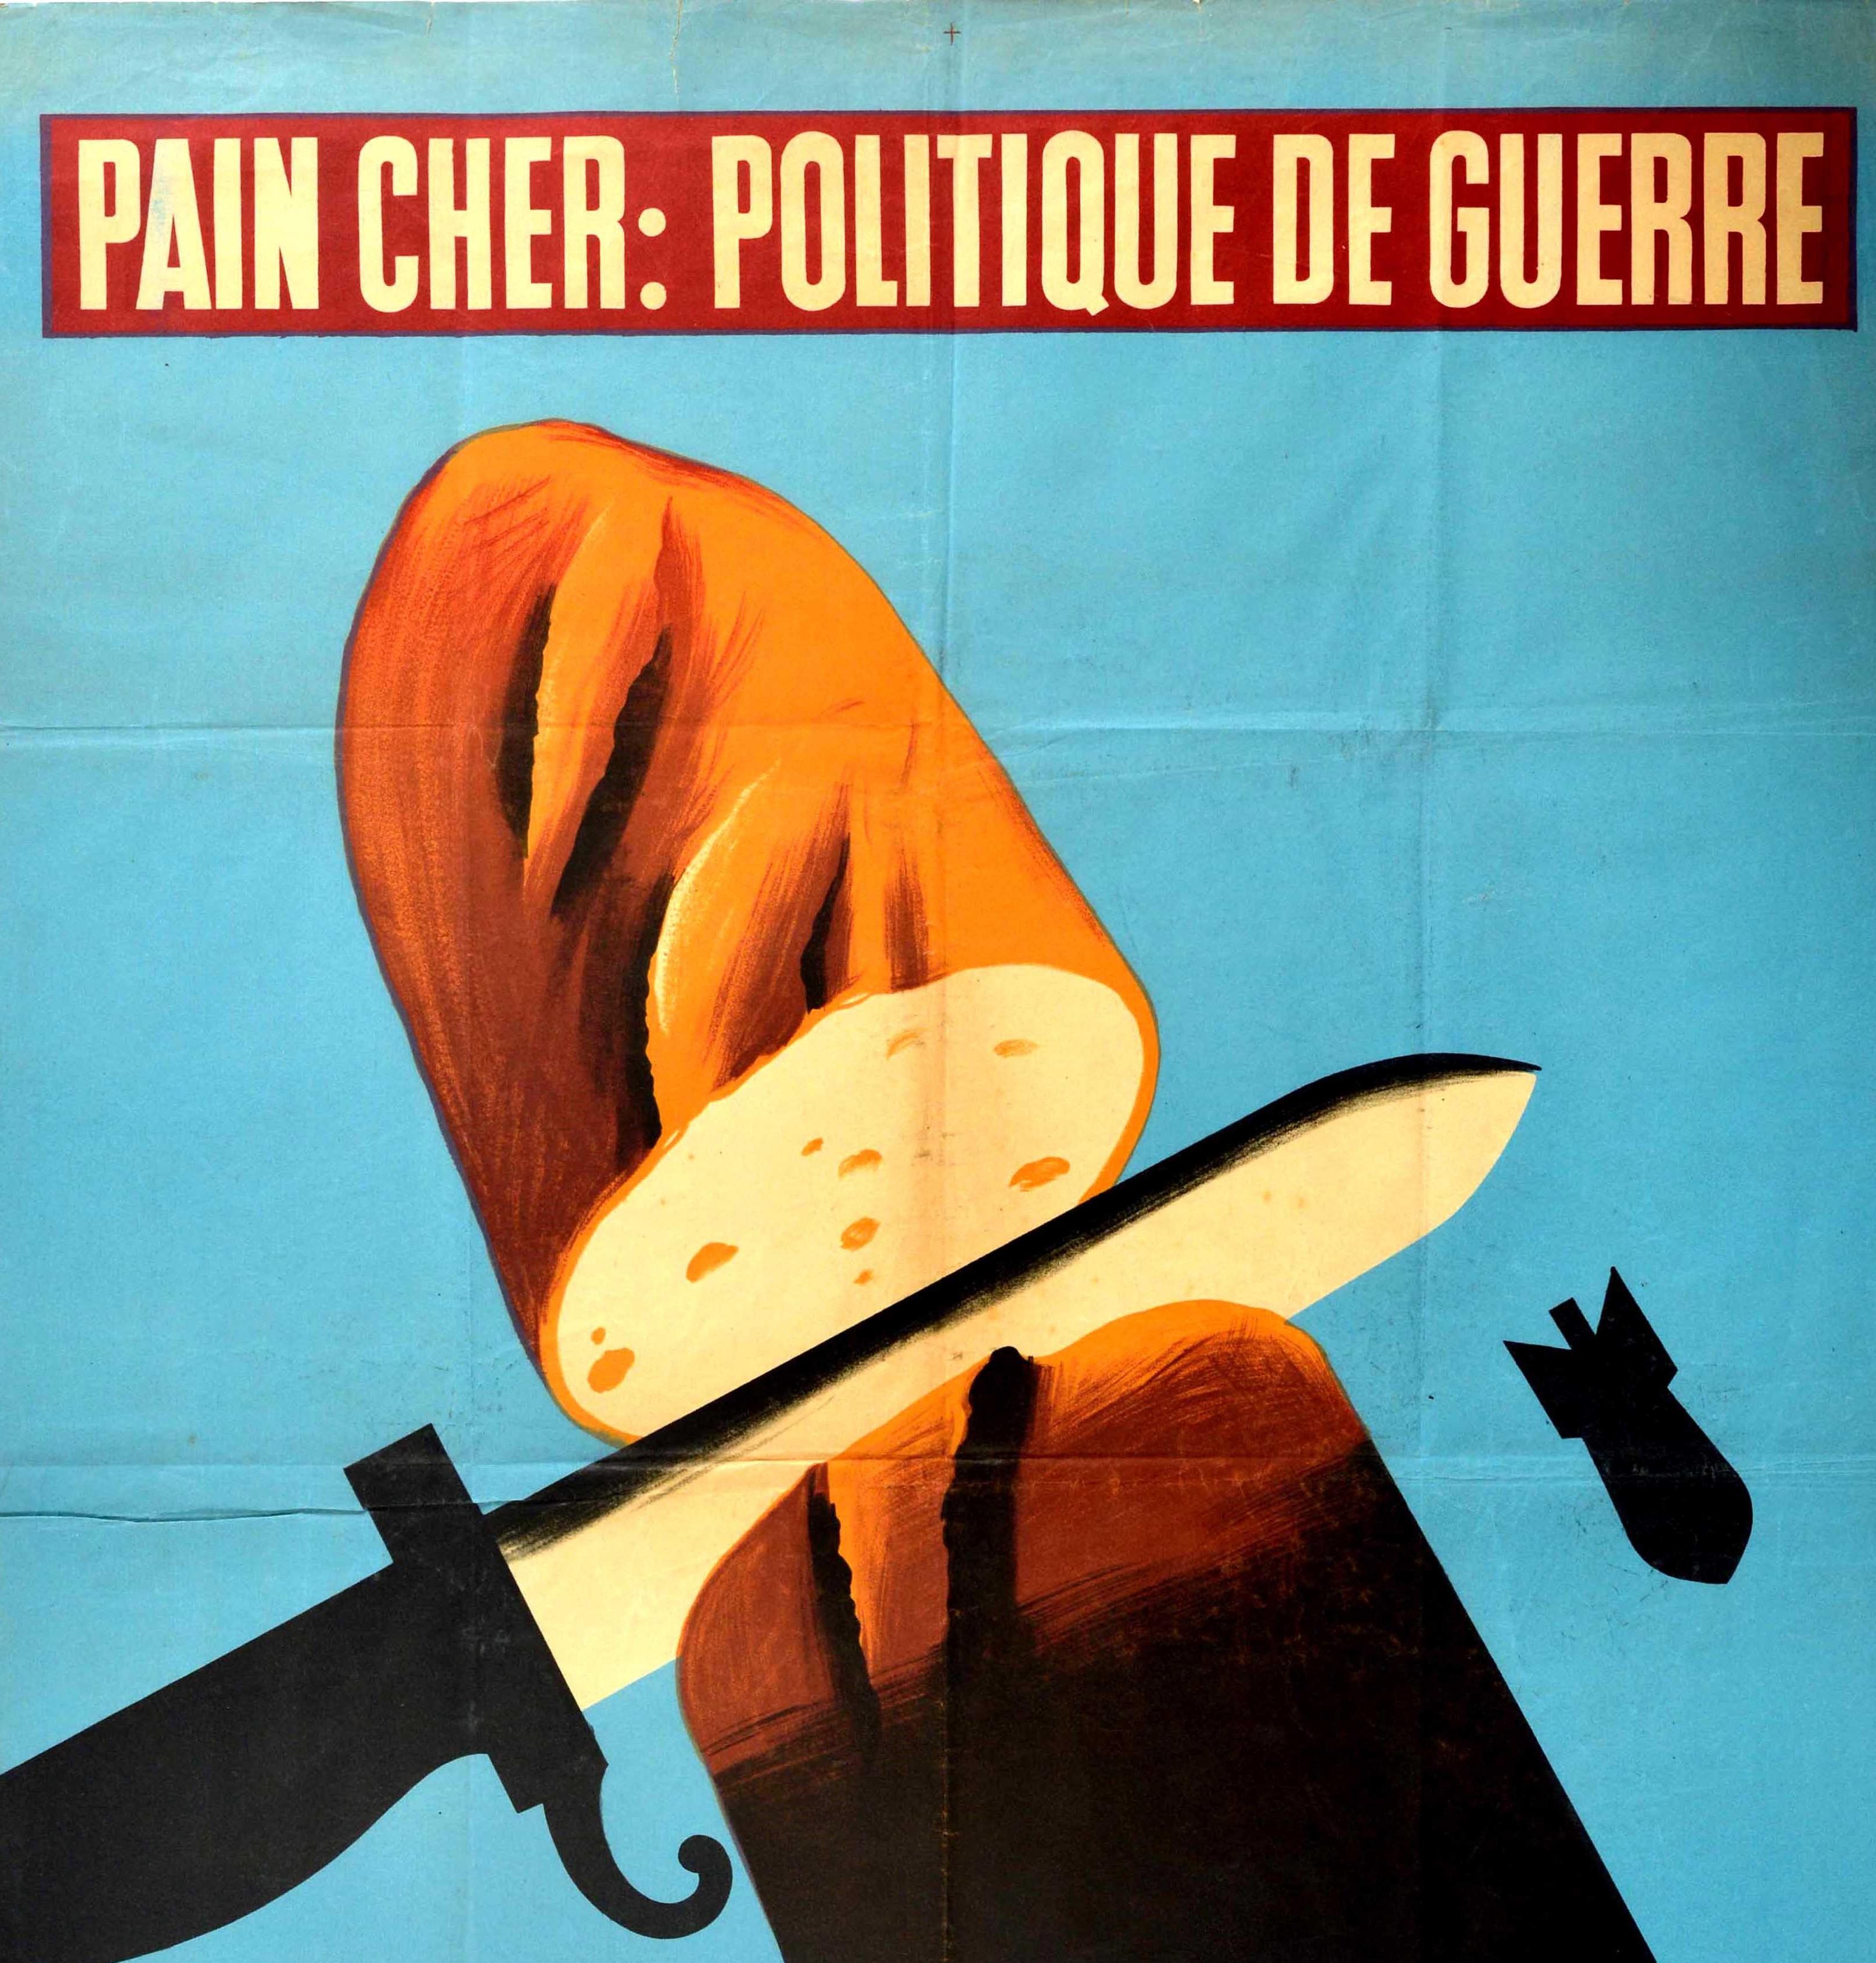 Original vintage World War Two French political propaganda poster - Pain Cher: Politique de Guerre / Expensive Bread: The Politics of War. Great illustration against a blue background featuring a knife cutting a loaf of bread in half with the bottom